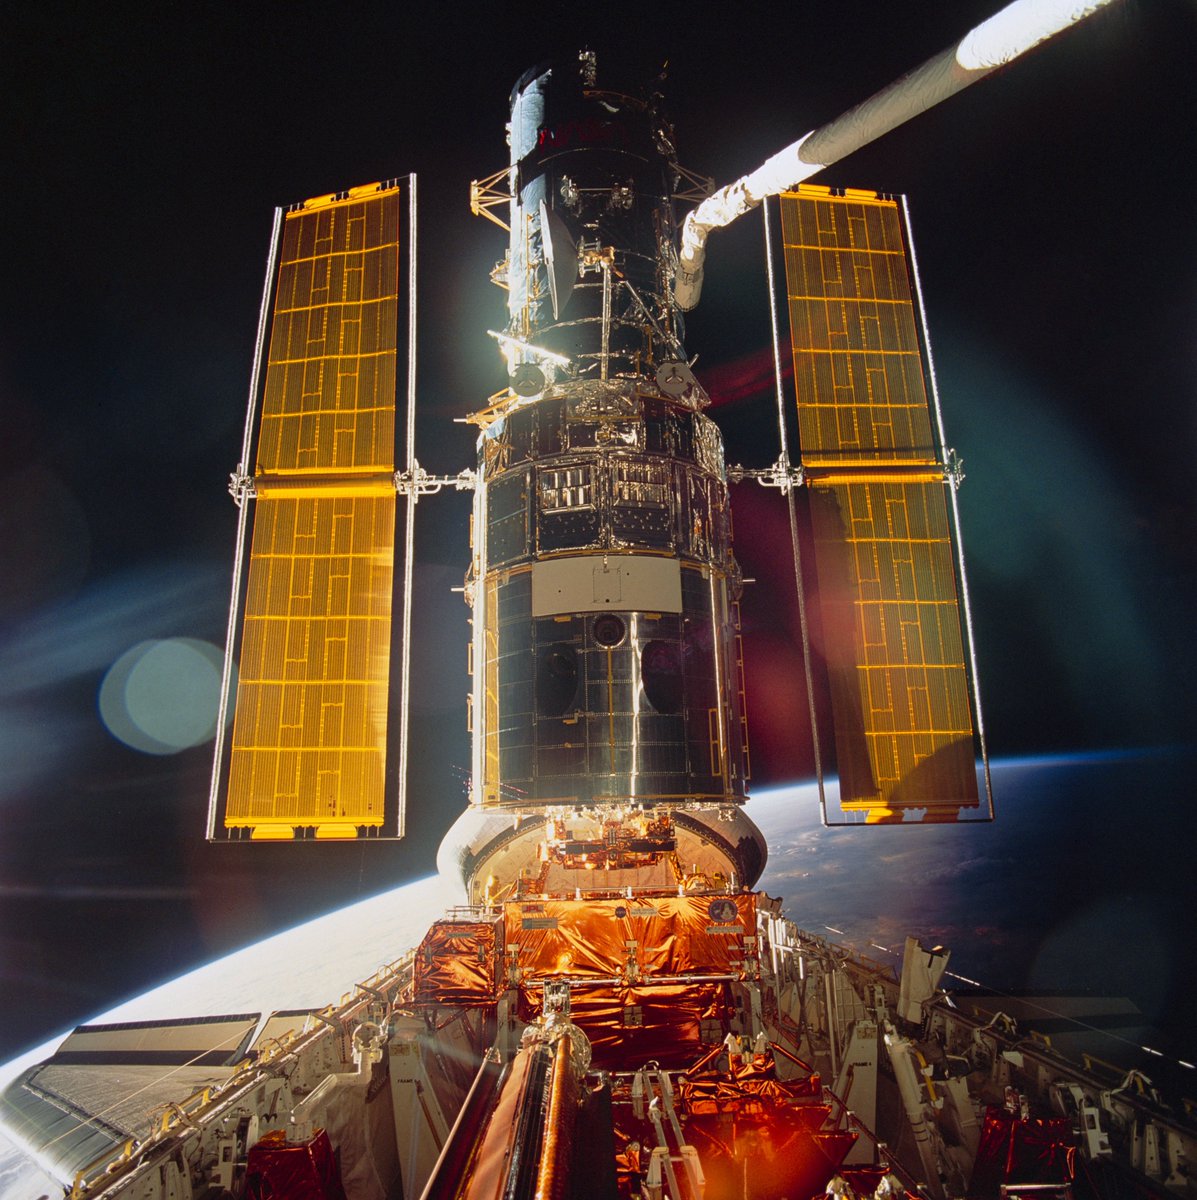 And  @NASAHubble was deemed saved. This was the first of five servicing missions for the telescope, the latter conducted to extend the its wavelength range, install new gyros, replace solar panels and more, extending Hubble’s life far beyond its initial design.